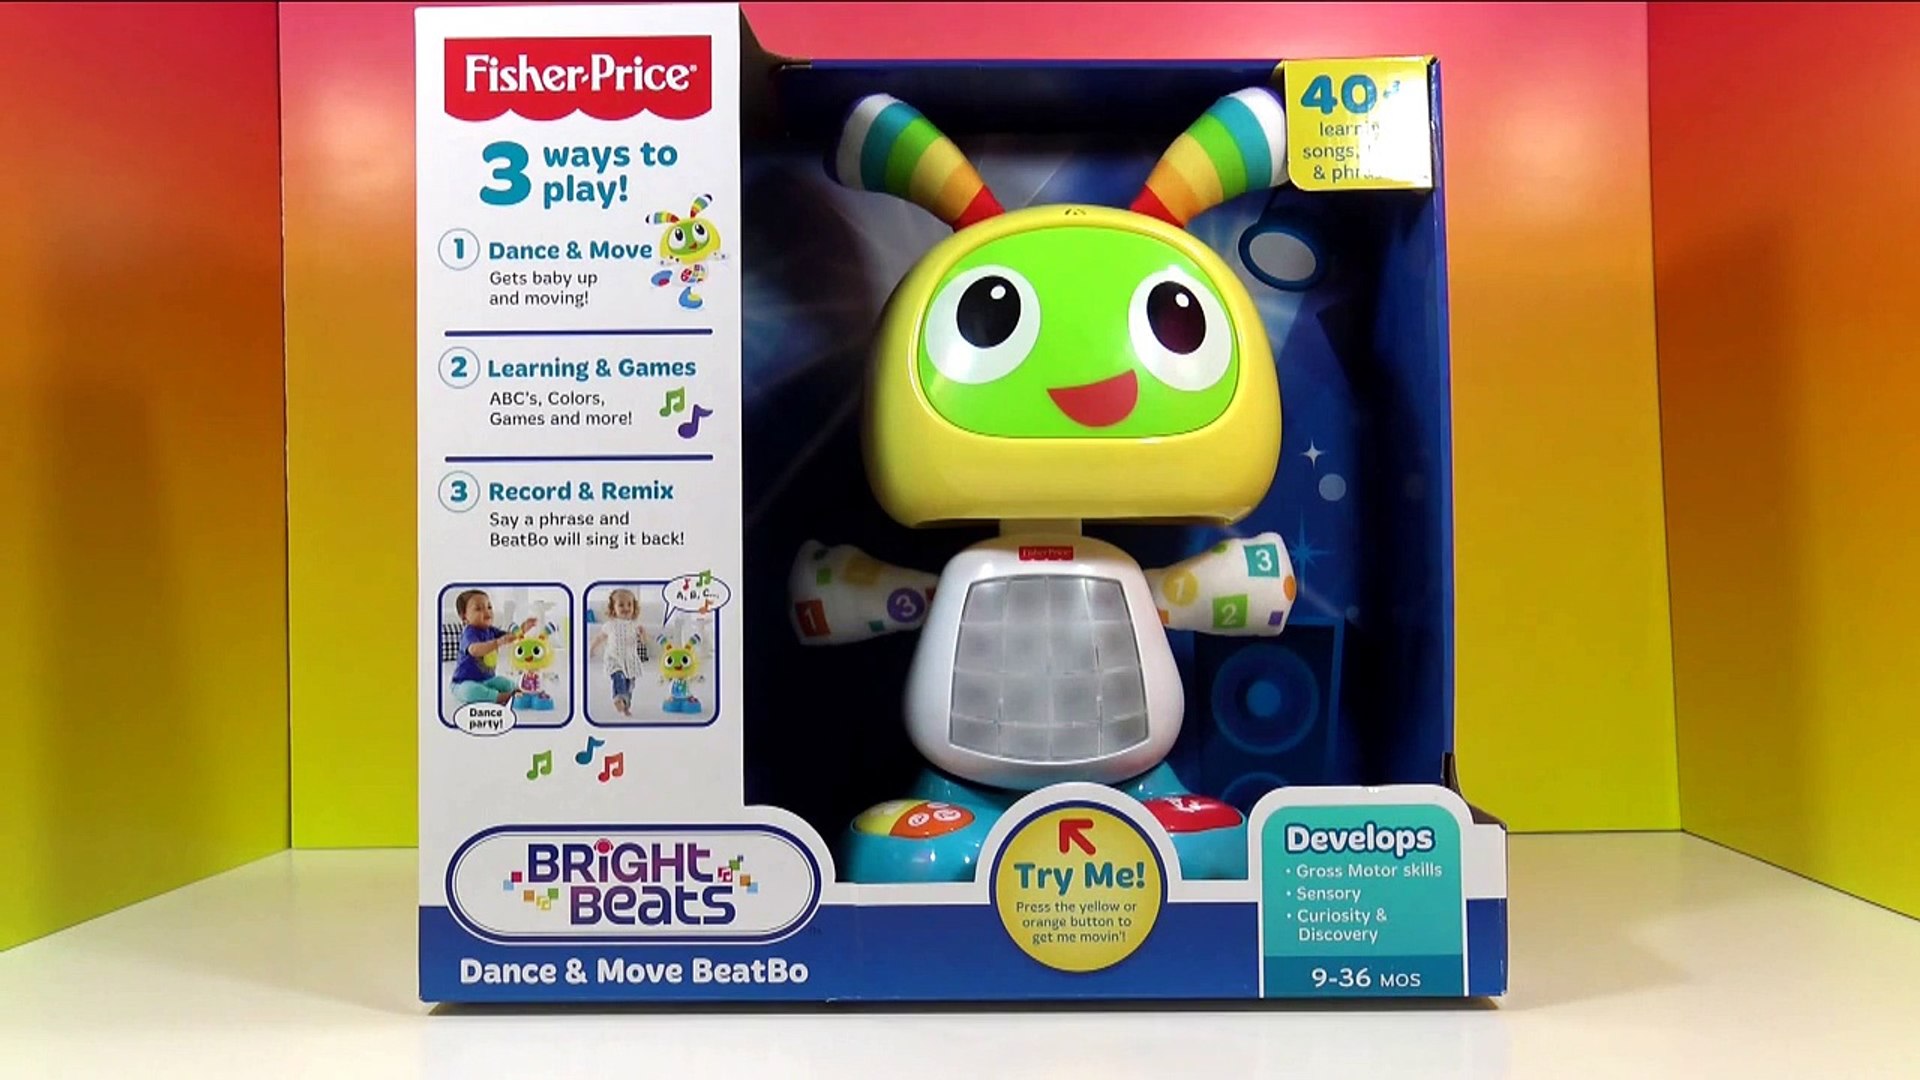 Bright Beats Dance & Move BeatBo from Fisher-Price - Dailymotion Video